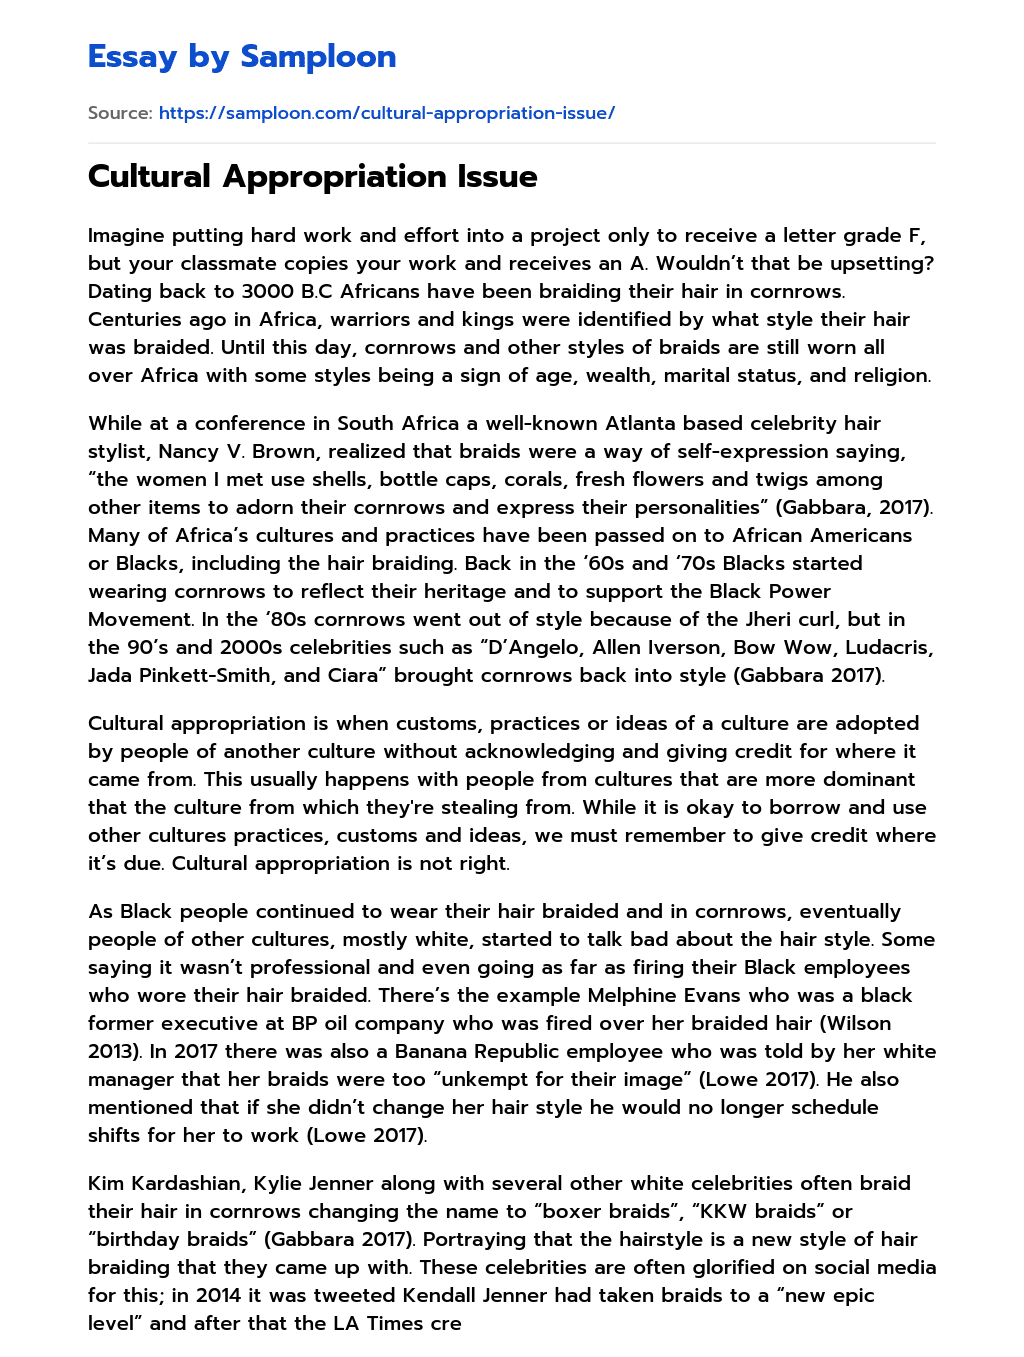 essay about cultural appropriation